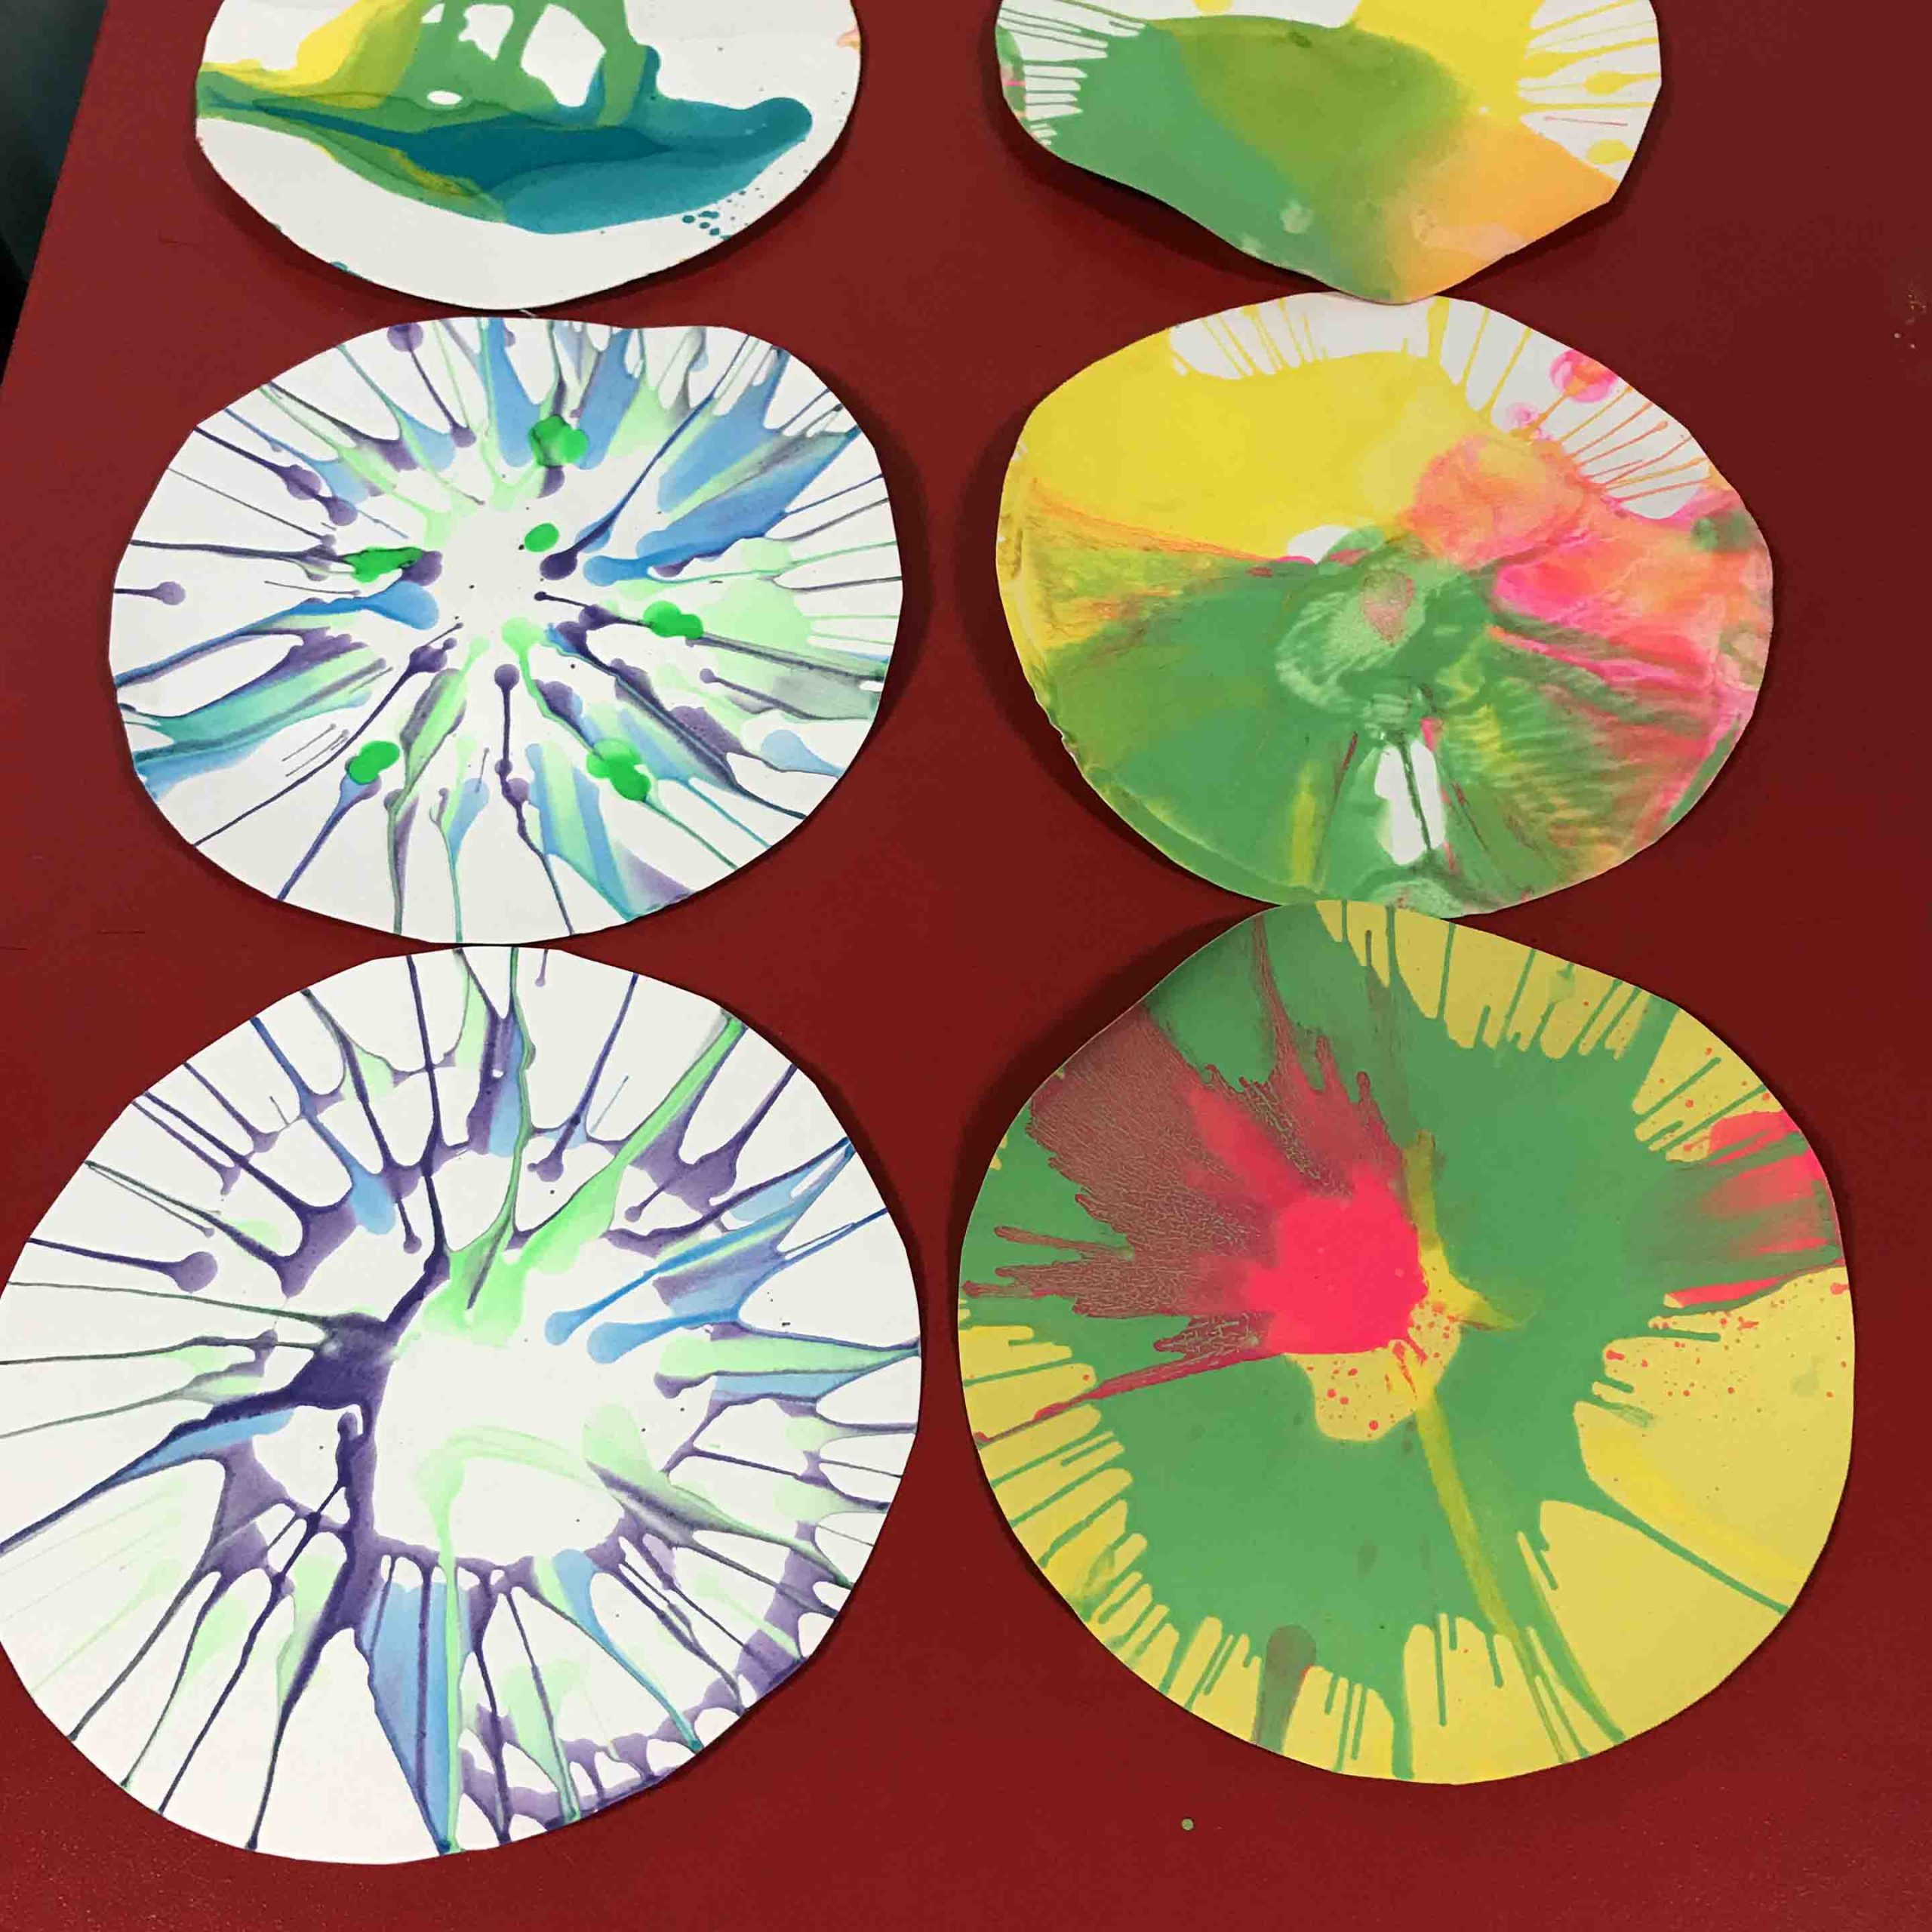 Image of circular paintings with paint spraying in a spin pattern